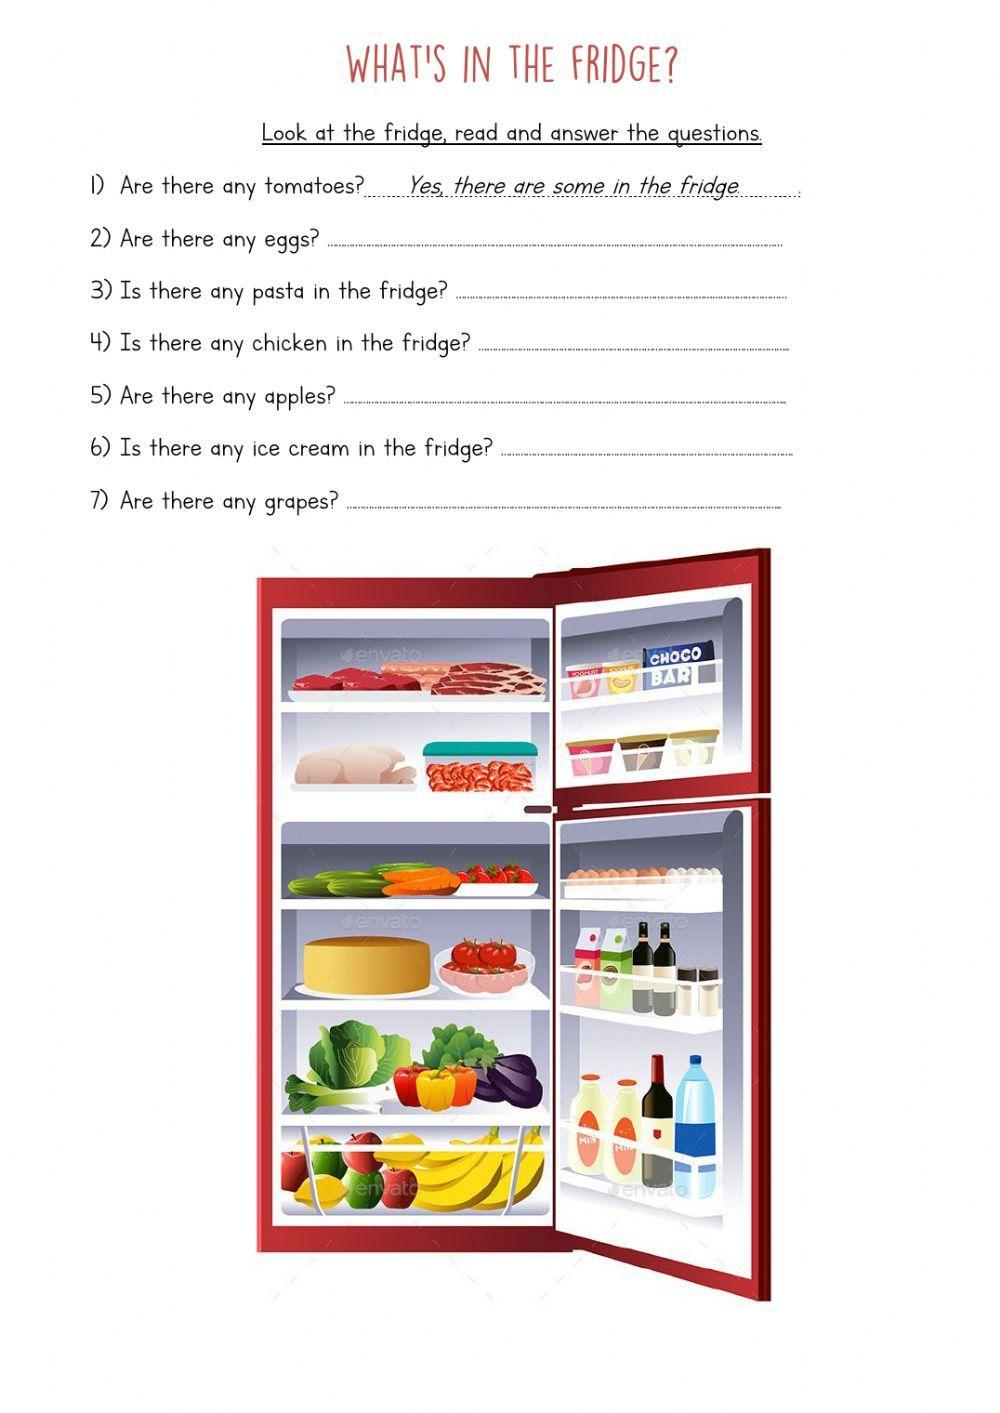 What's in the fridge? Answer